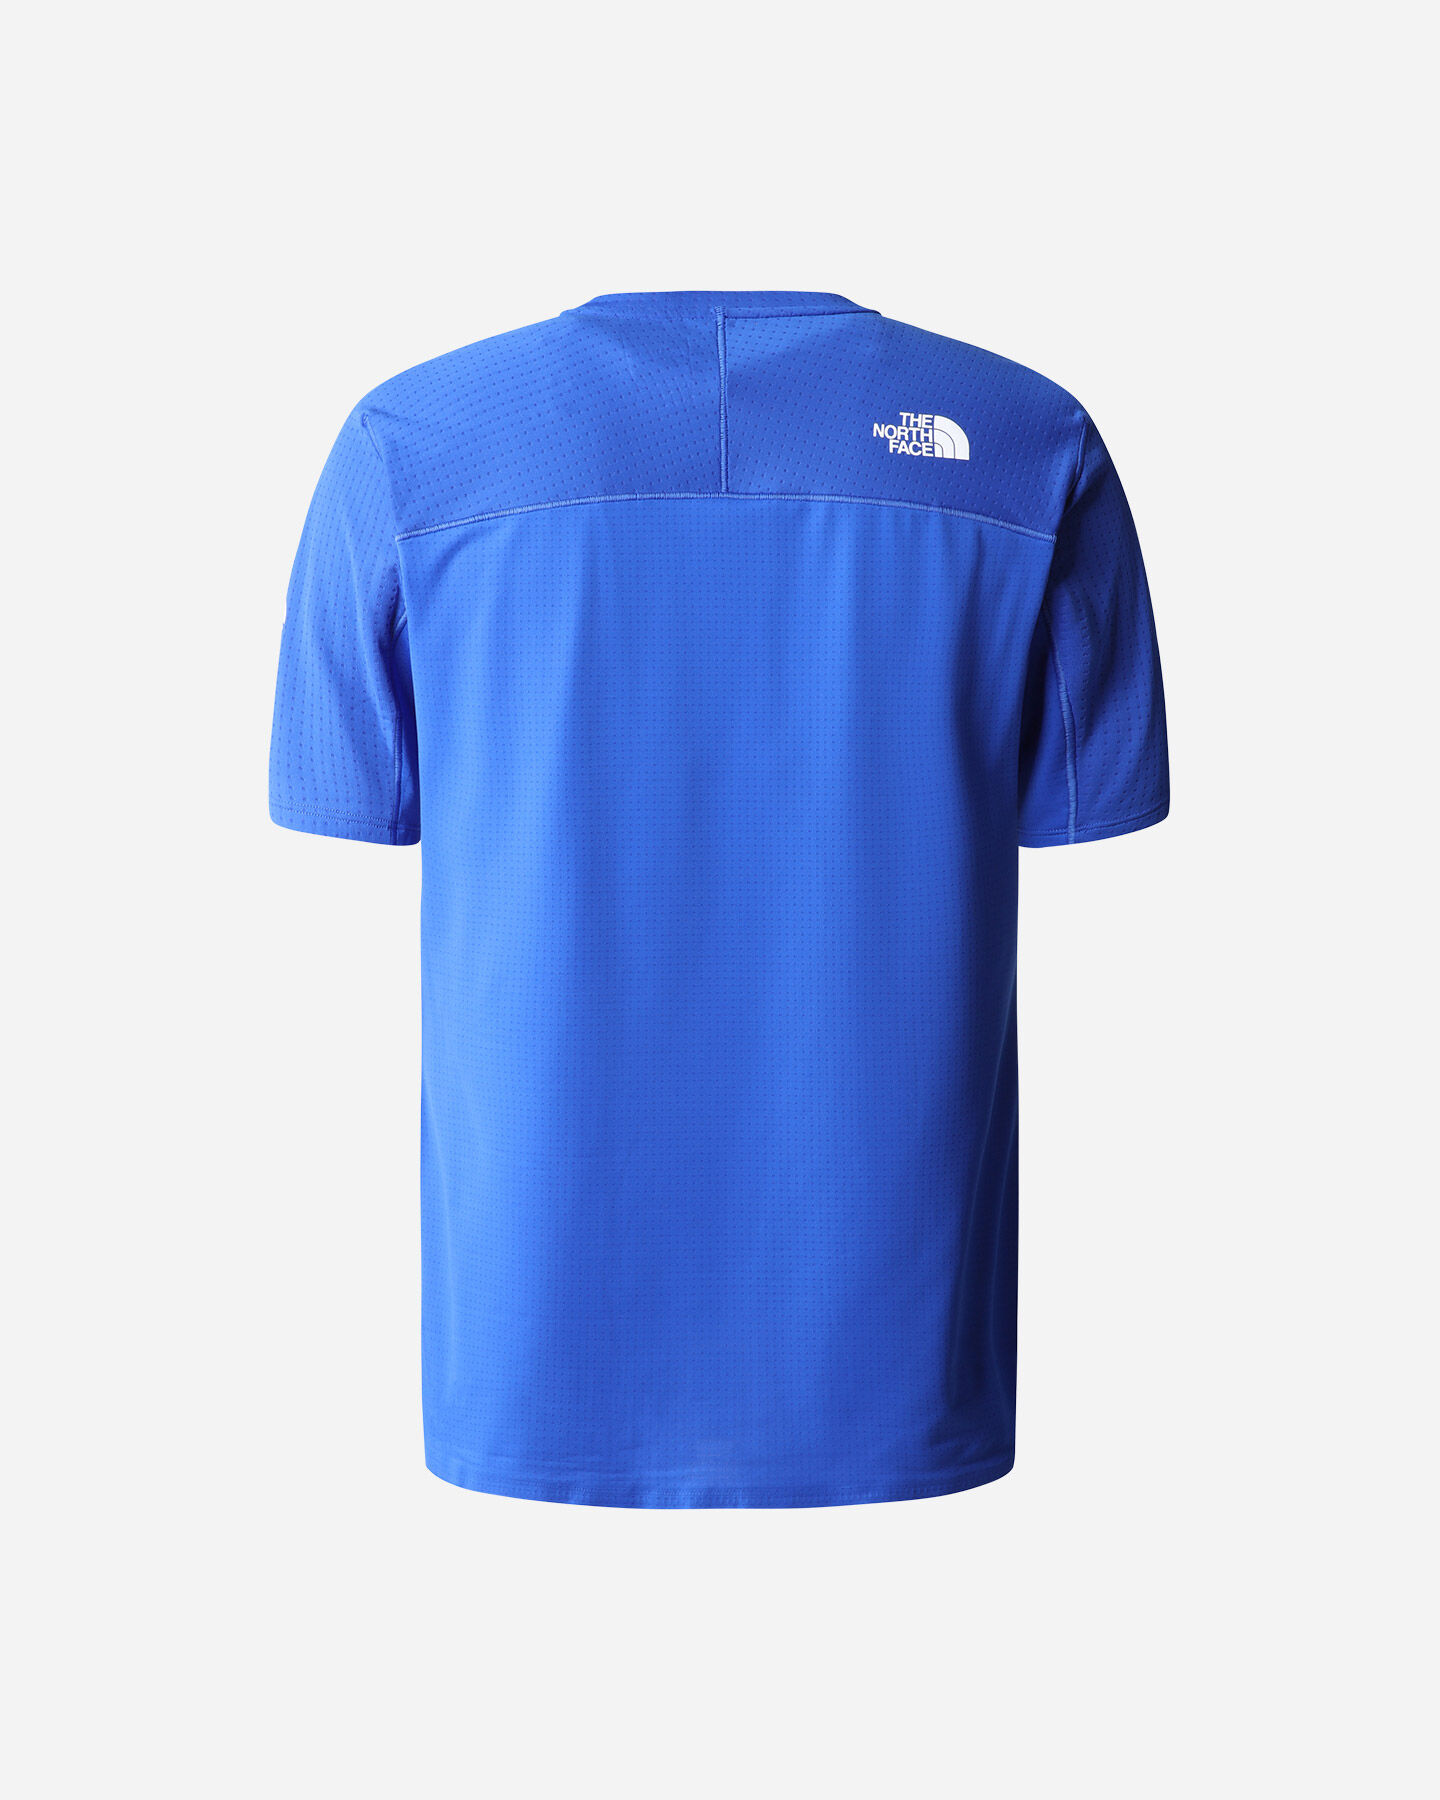  T-Shirt THE NORTH FACE SUMMIT CREVASSE M S5536409|CZ6|S scatto 1